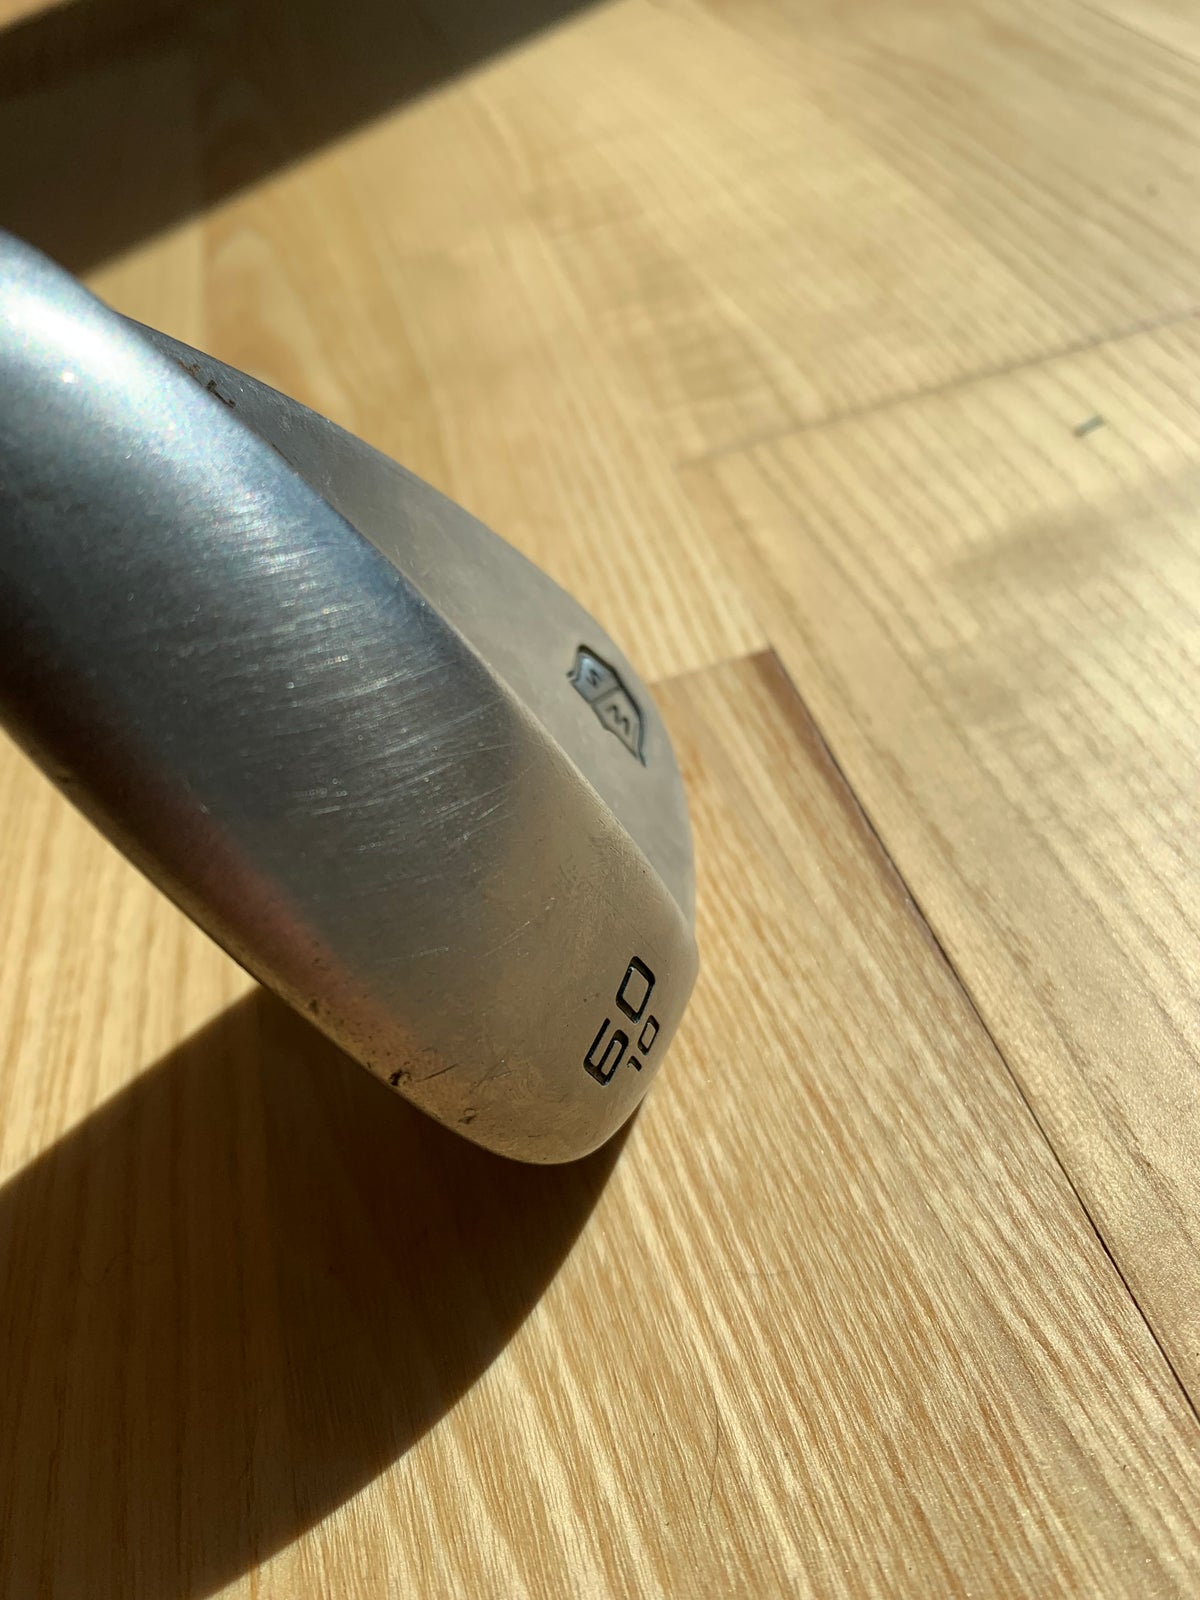 Anden wedge, stål, Wilson Staff full face 60 graders wedge